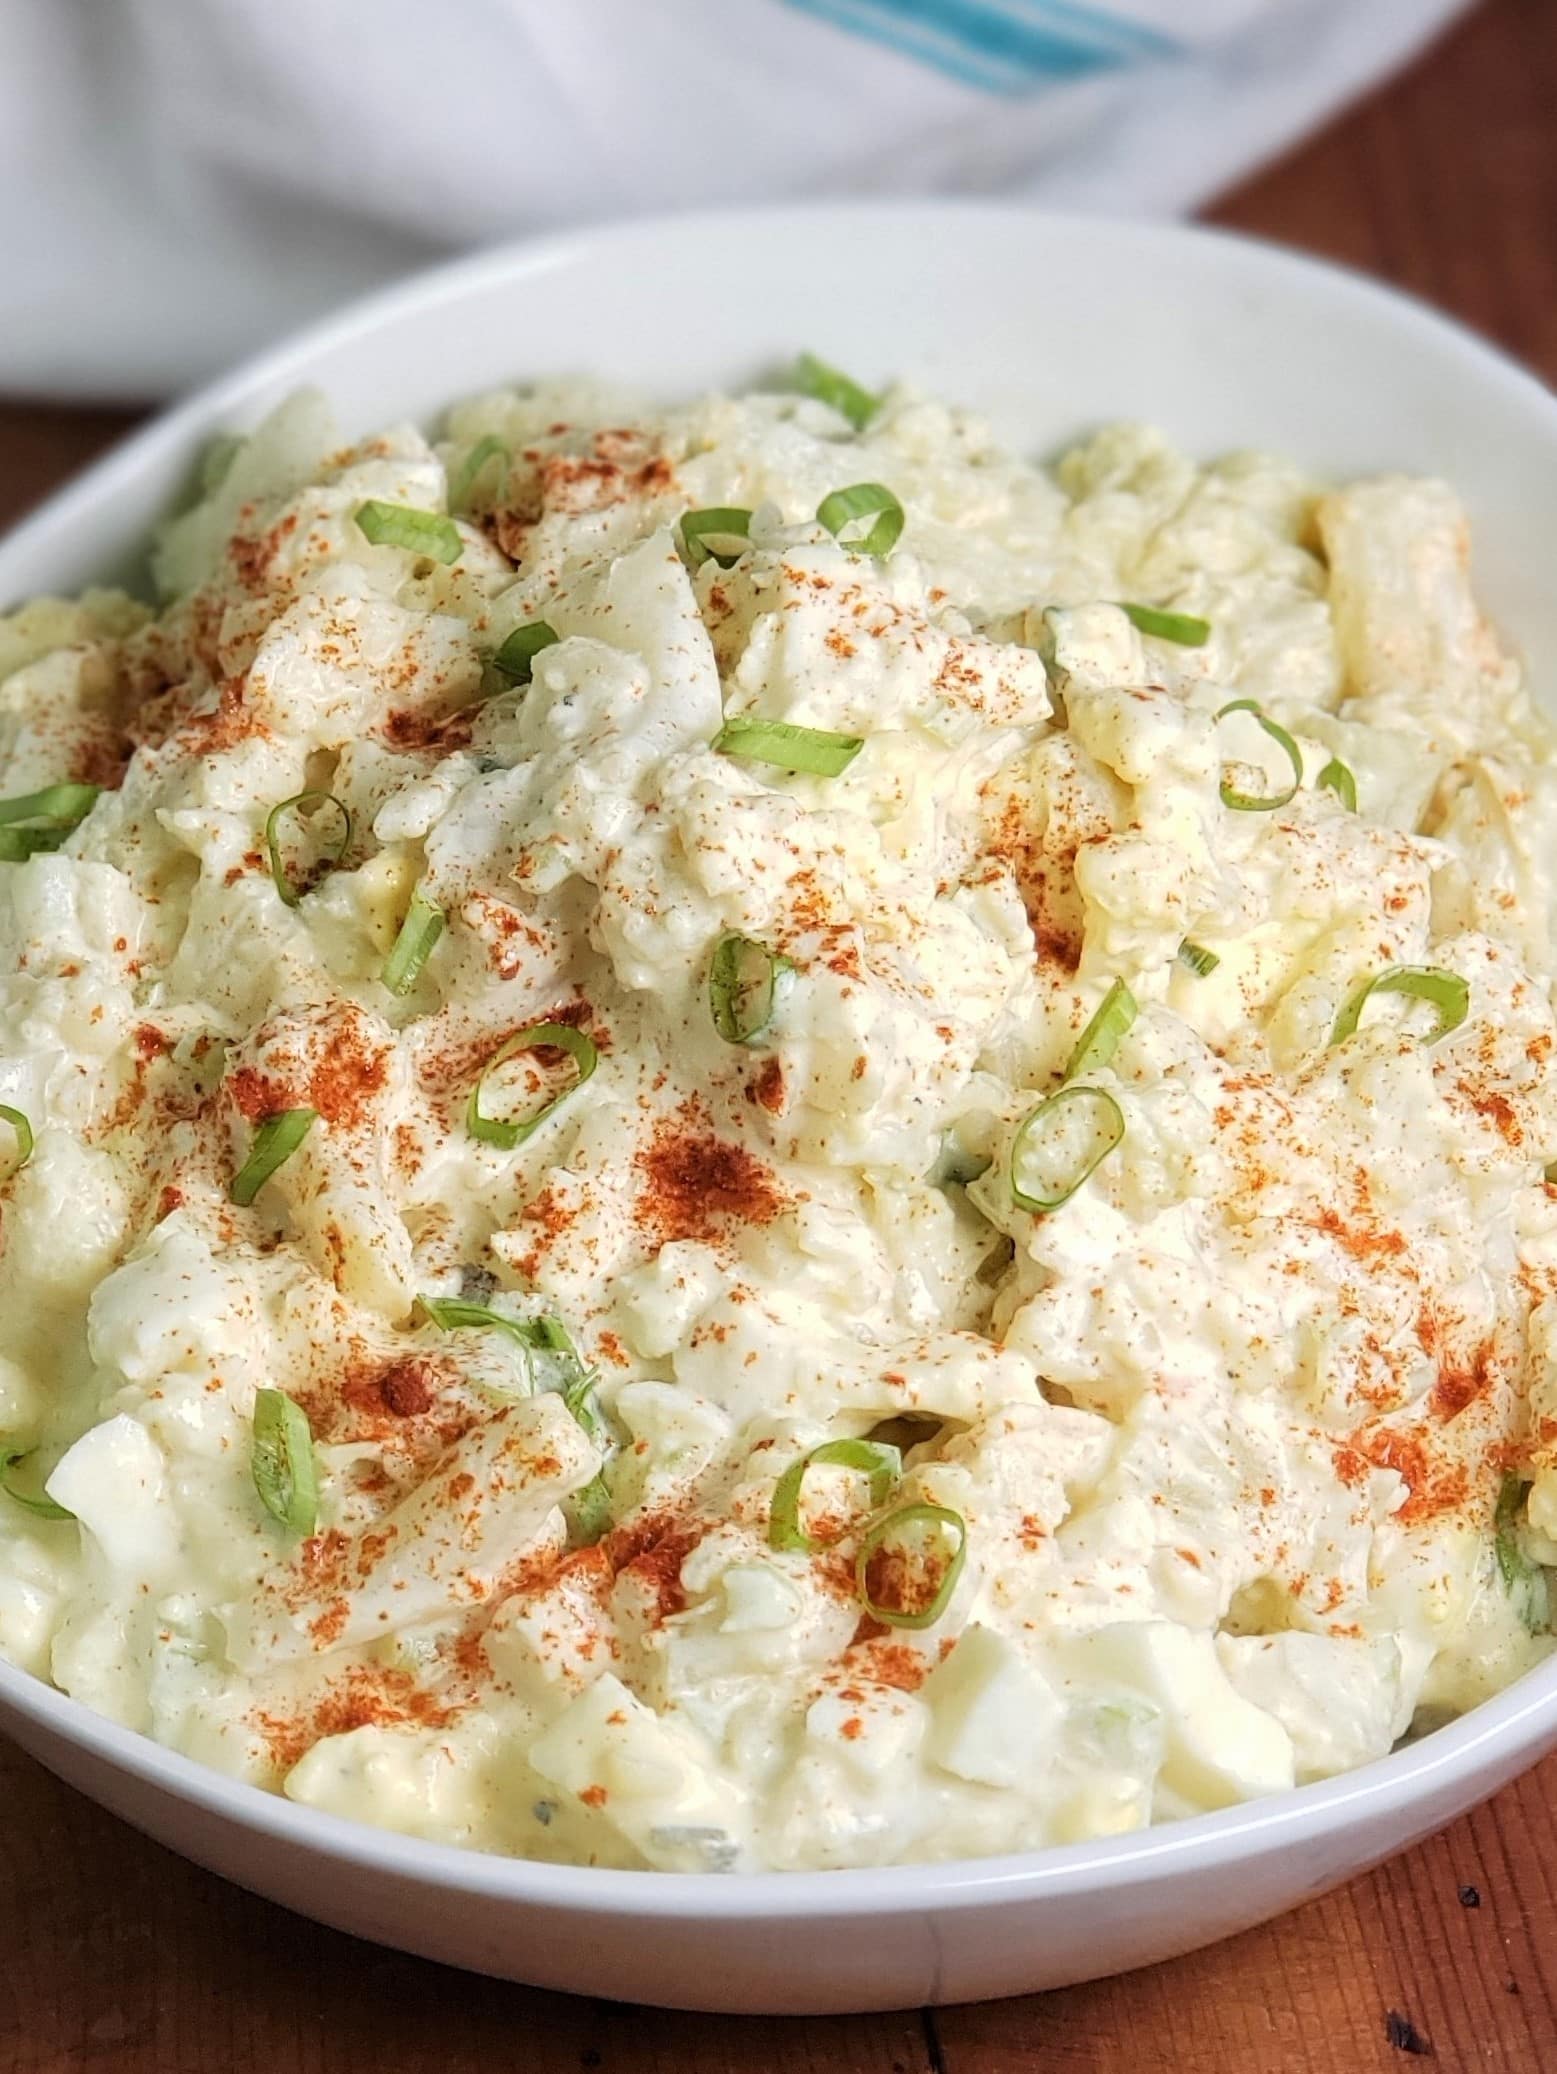 White Round Bowl with Cauliflower Mock Potato Salad, garnished with red paprika and green scallions for color